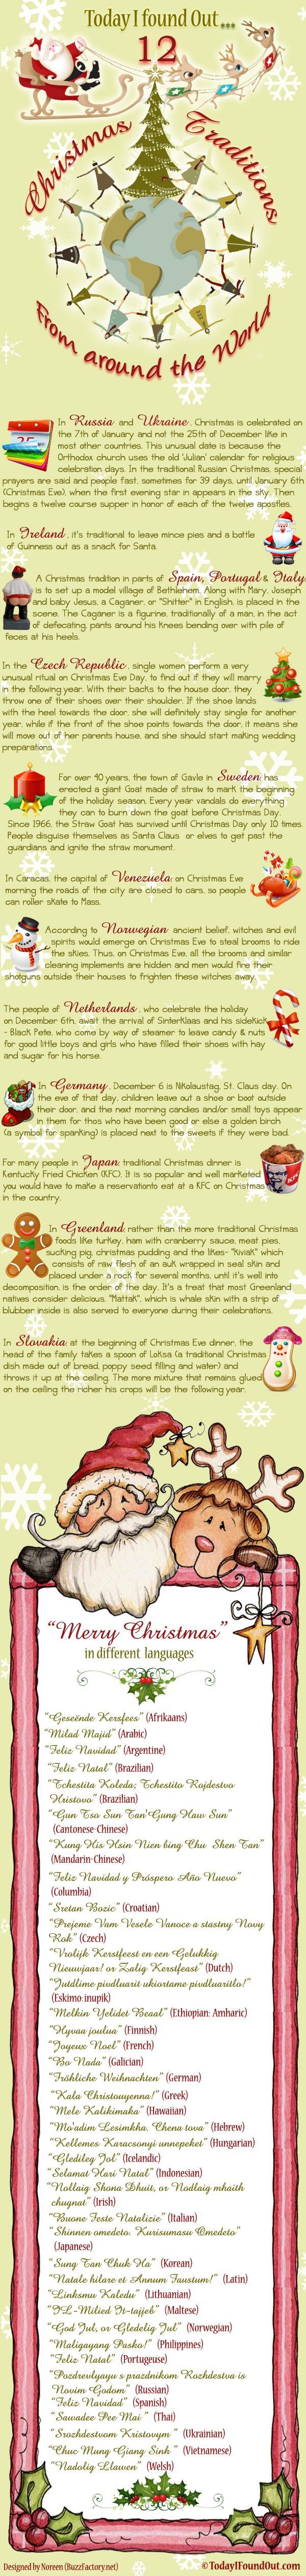 This is interesting – I want to adopt some of these traditions for this Christmas.